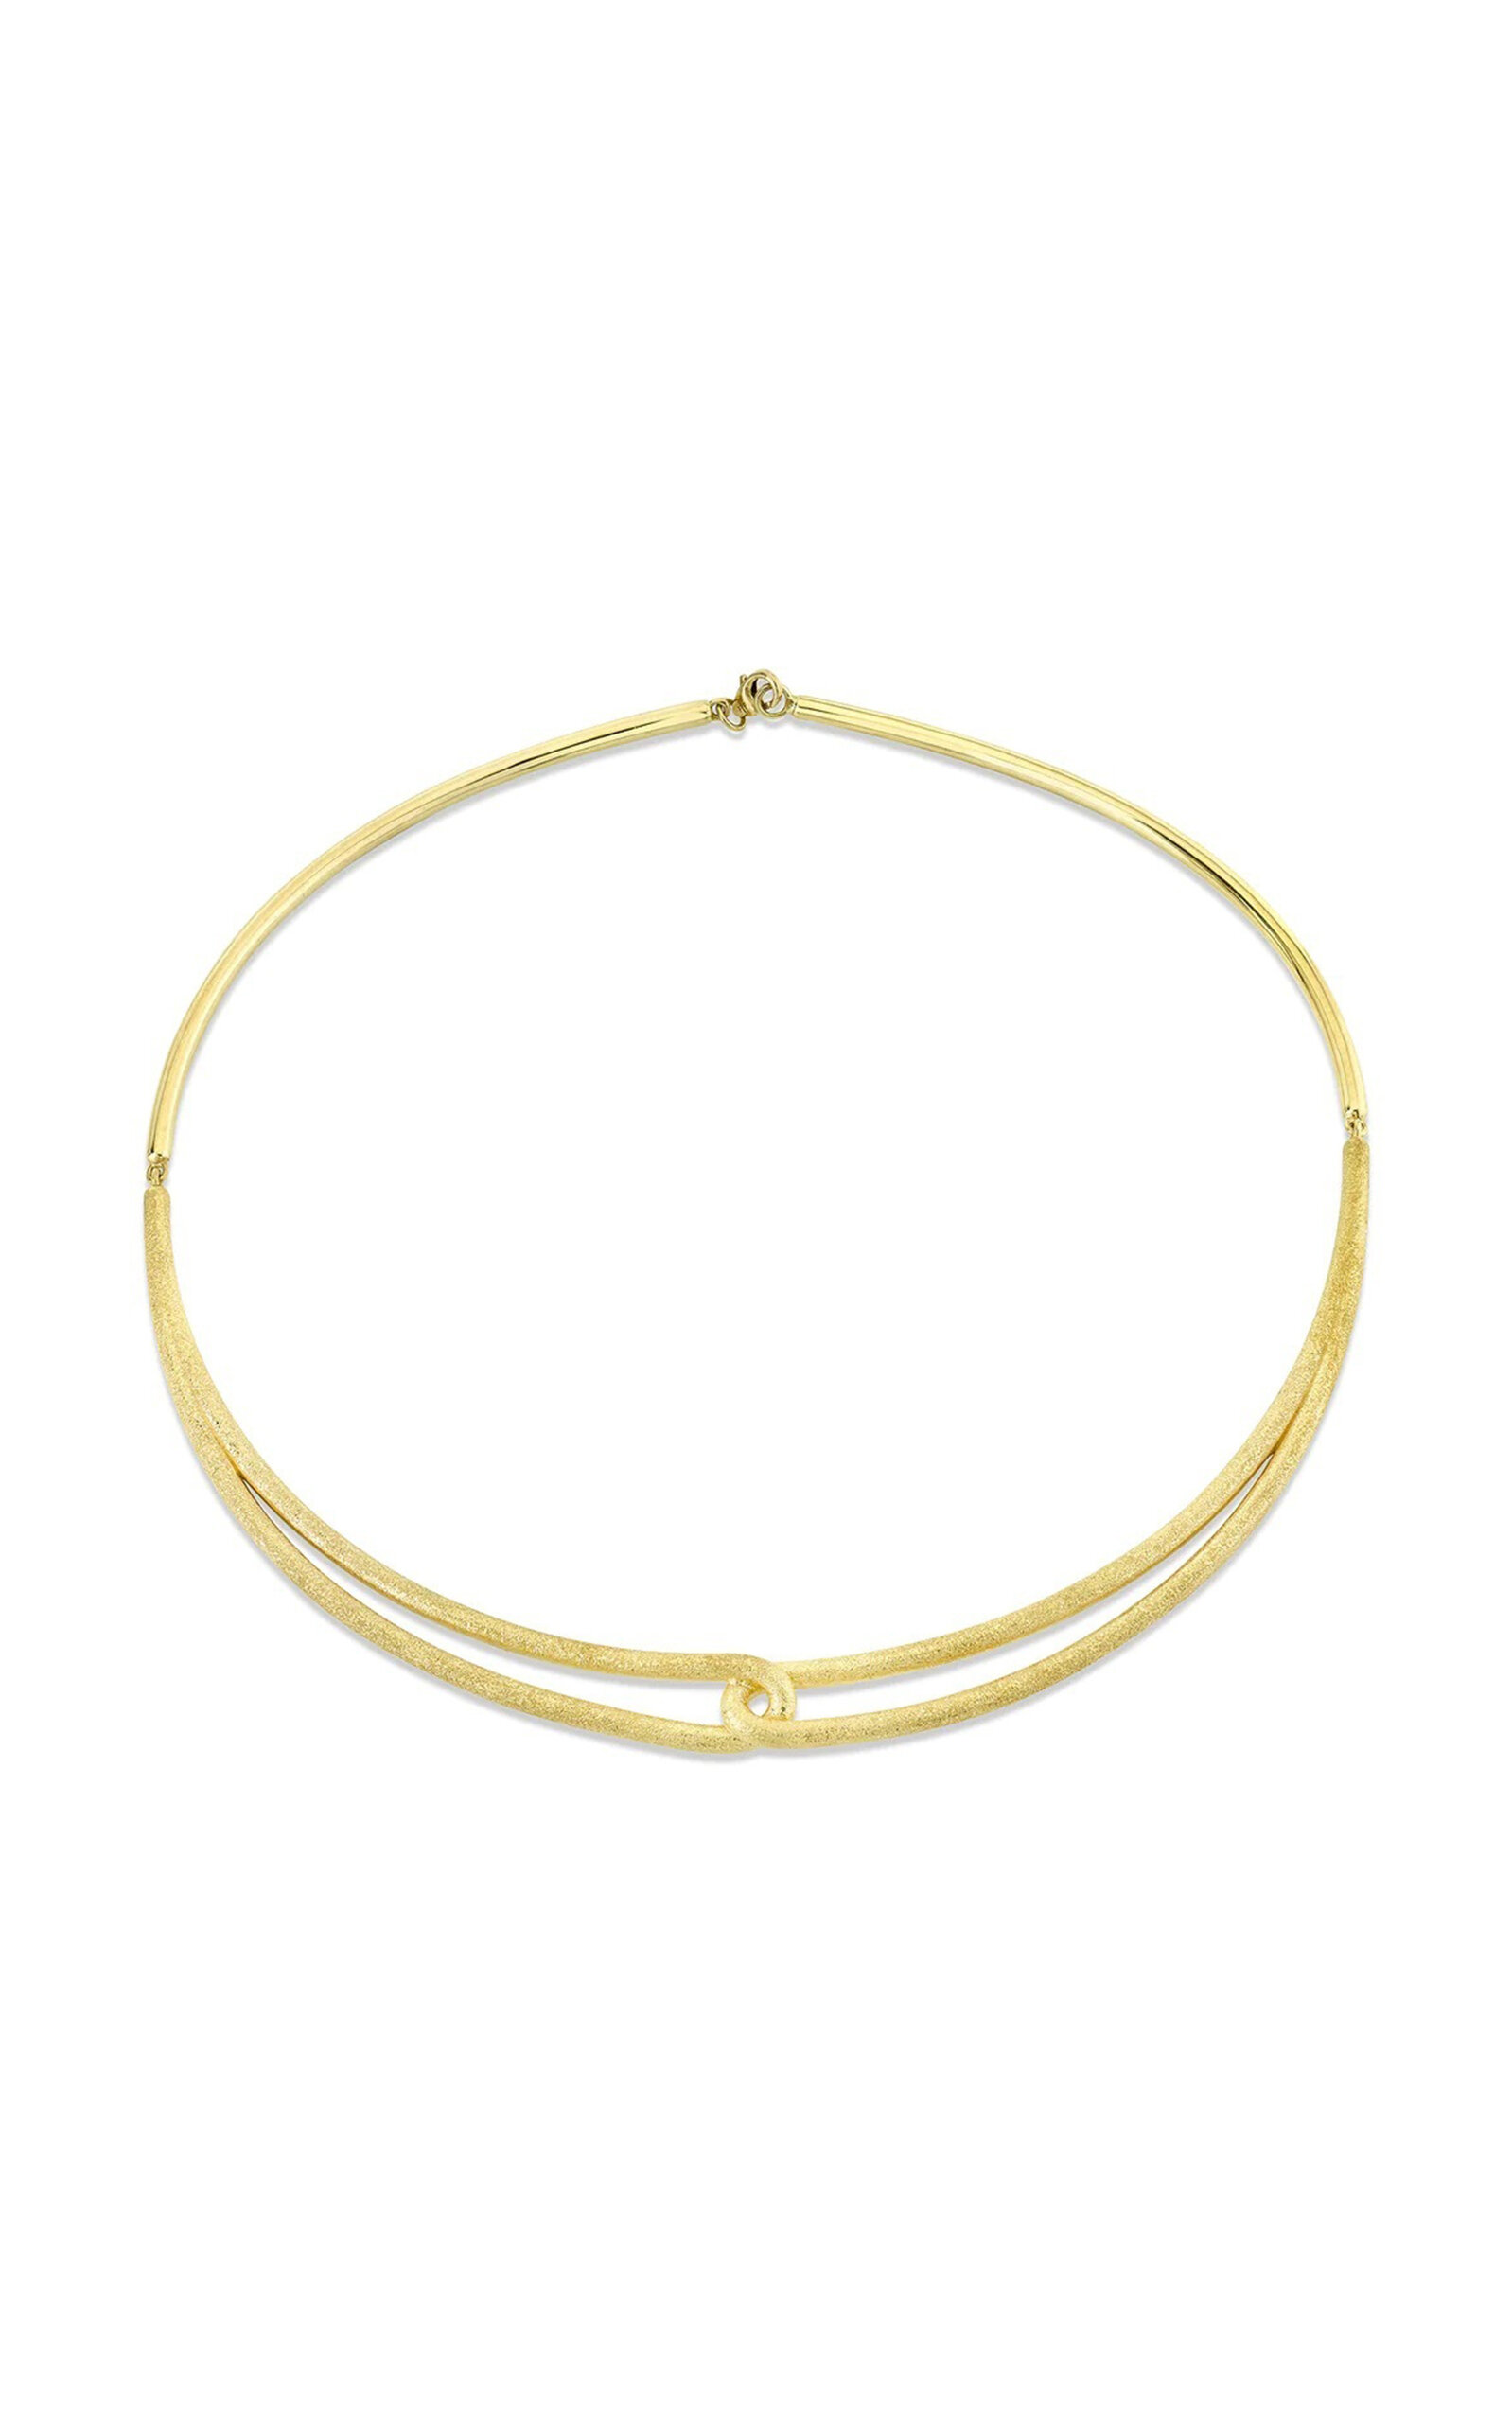 18k Yellow Gold Wisdom Knot Necklace